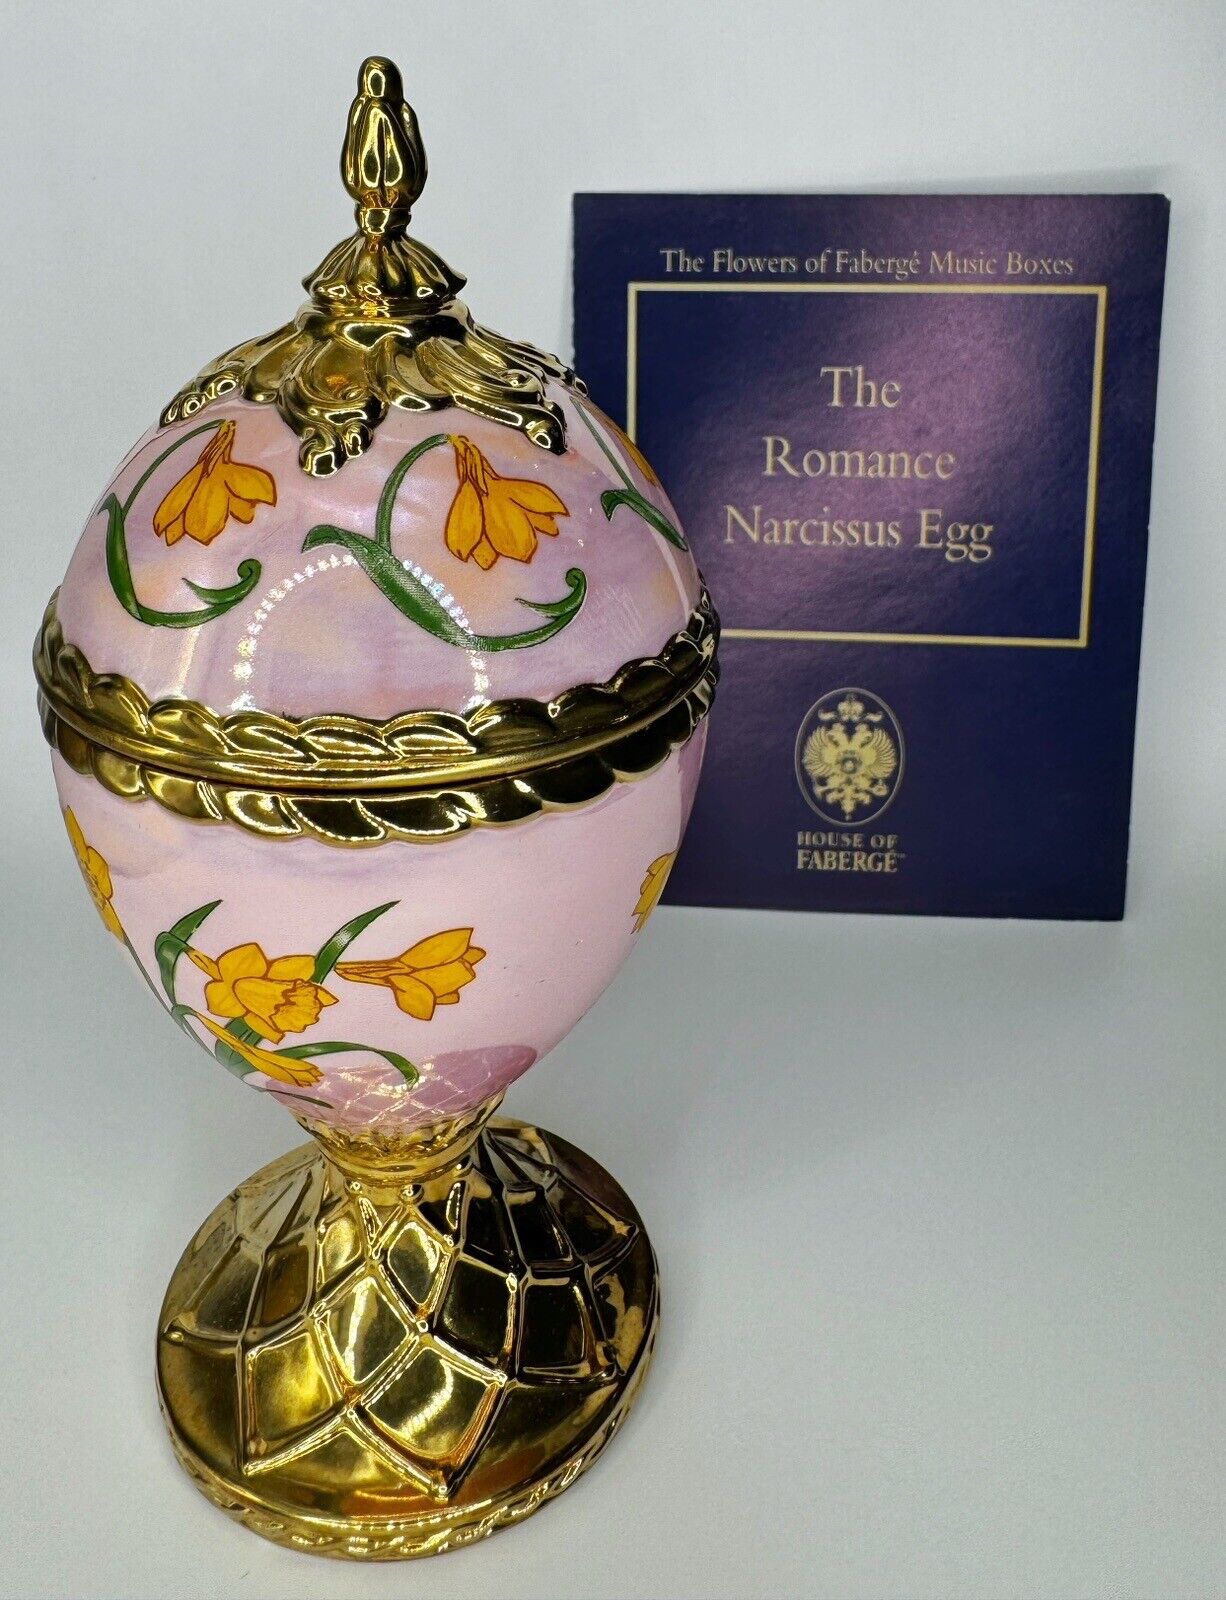 House of Faberge The Romance Narcissus Egg. Music box.